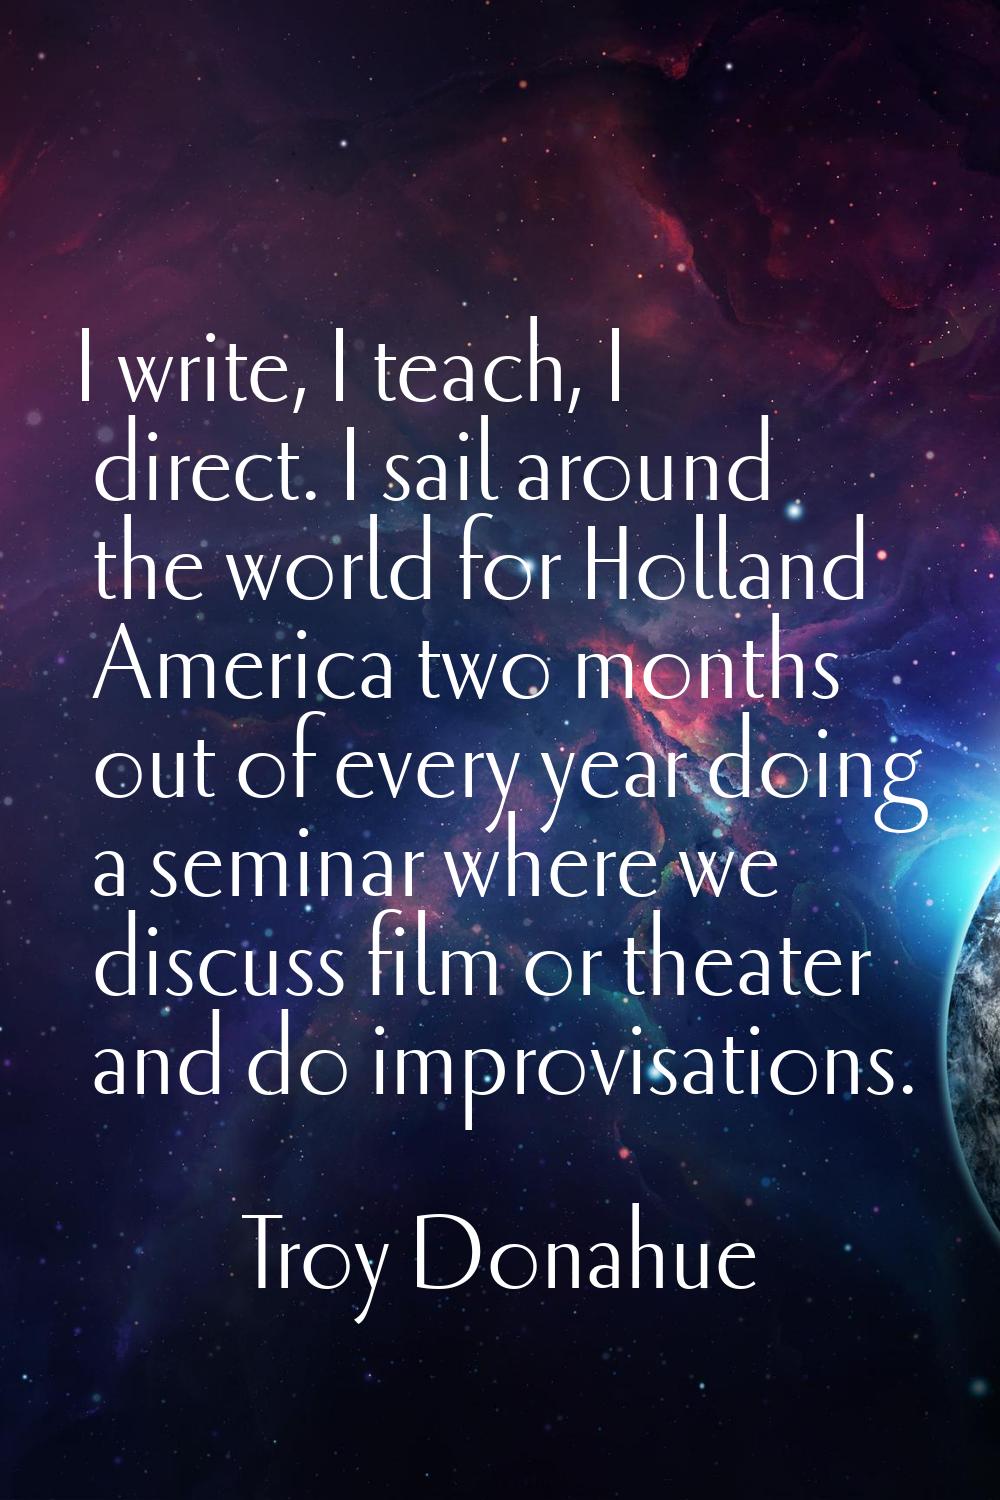 I write, I teach, I direct. I sail around the world for Holland America two months out of every yea